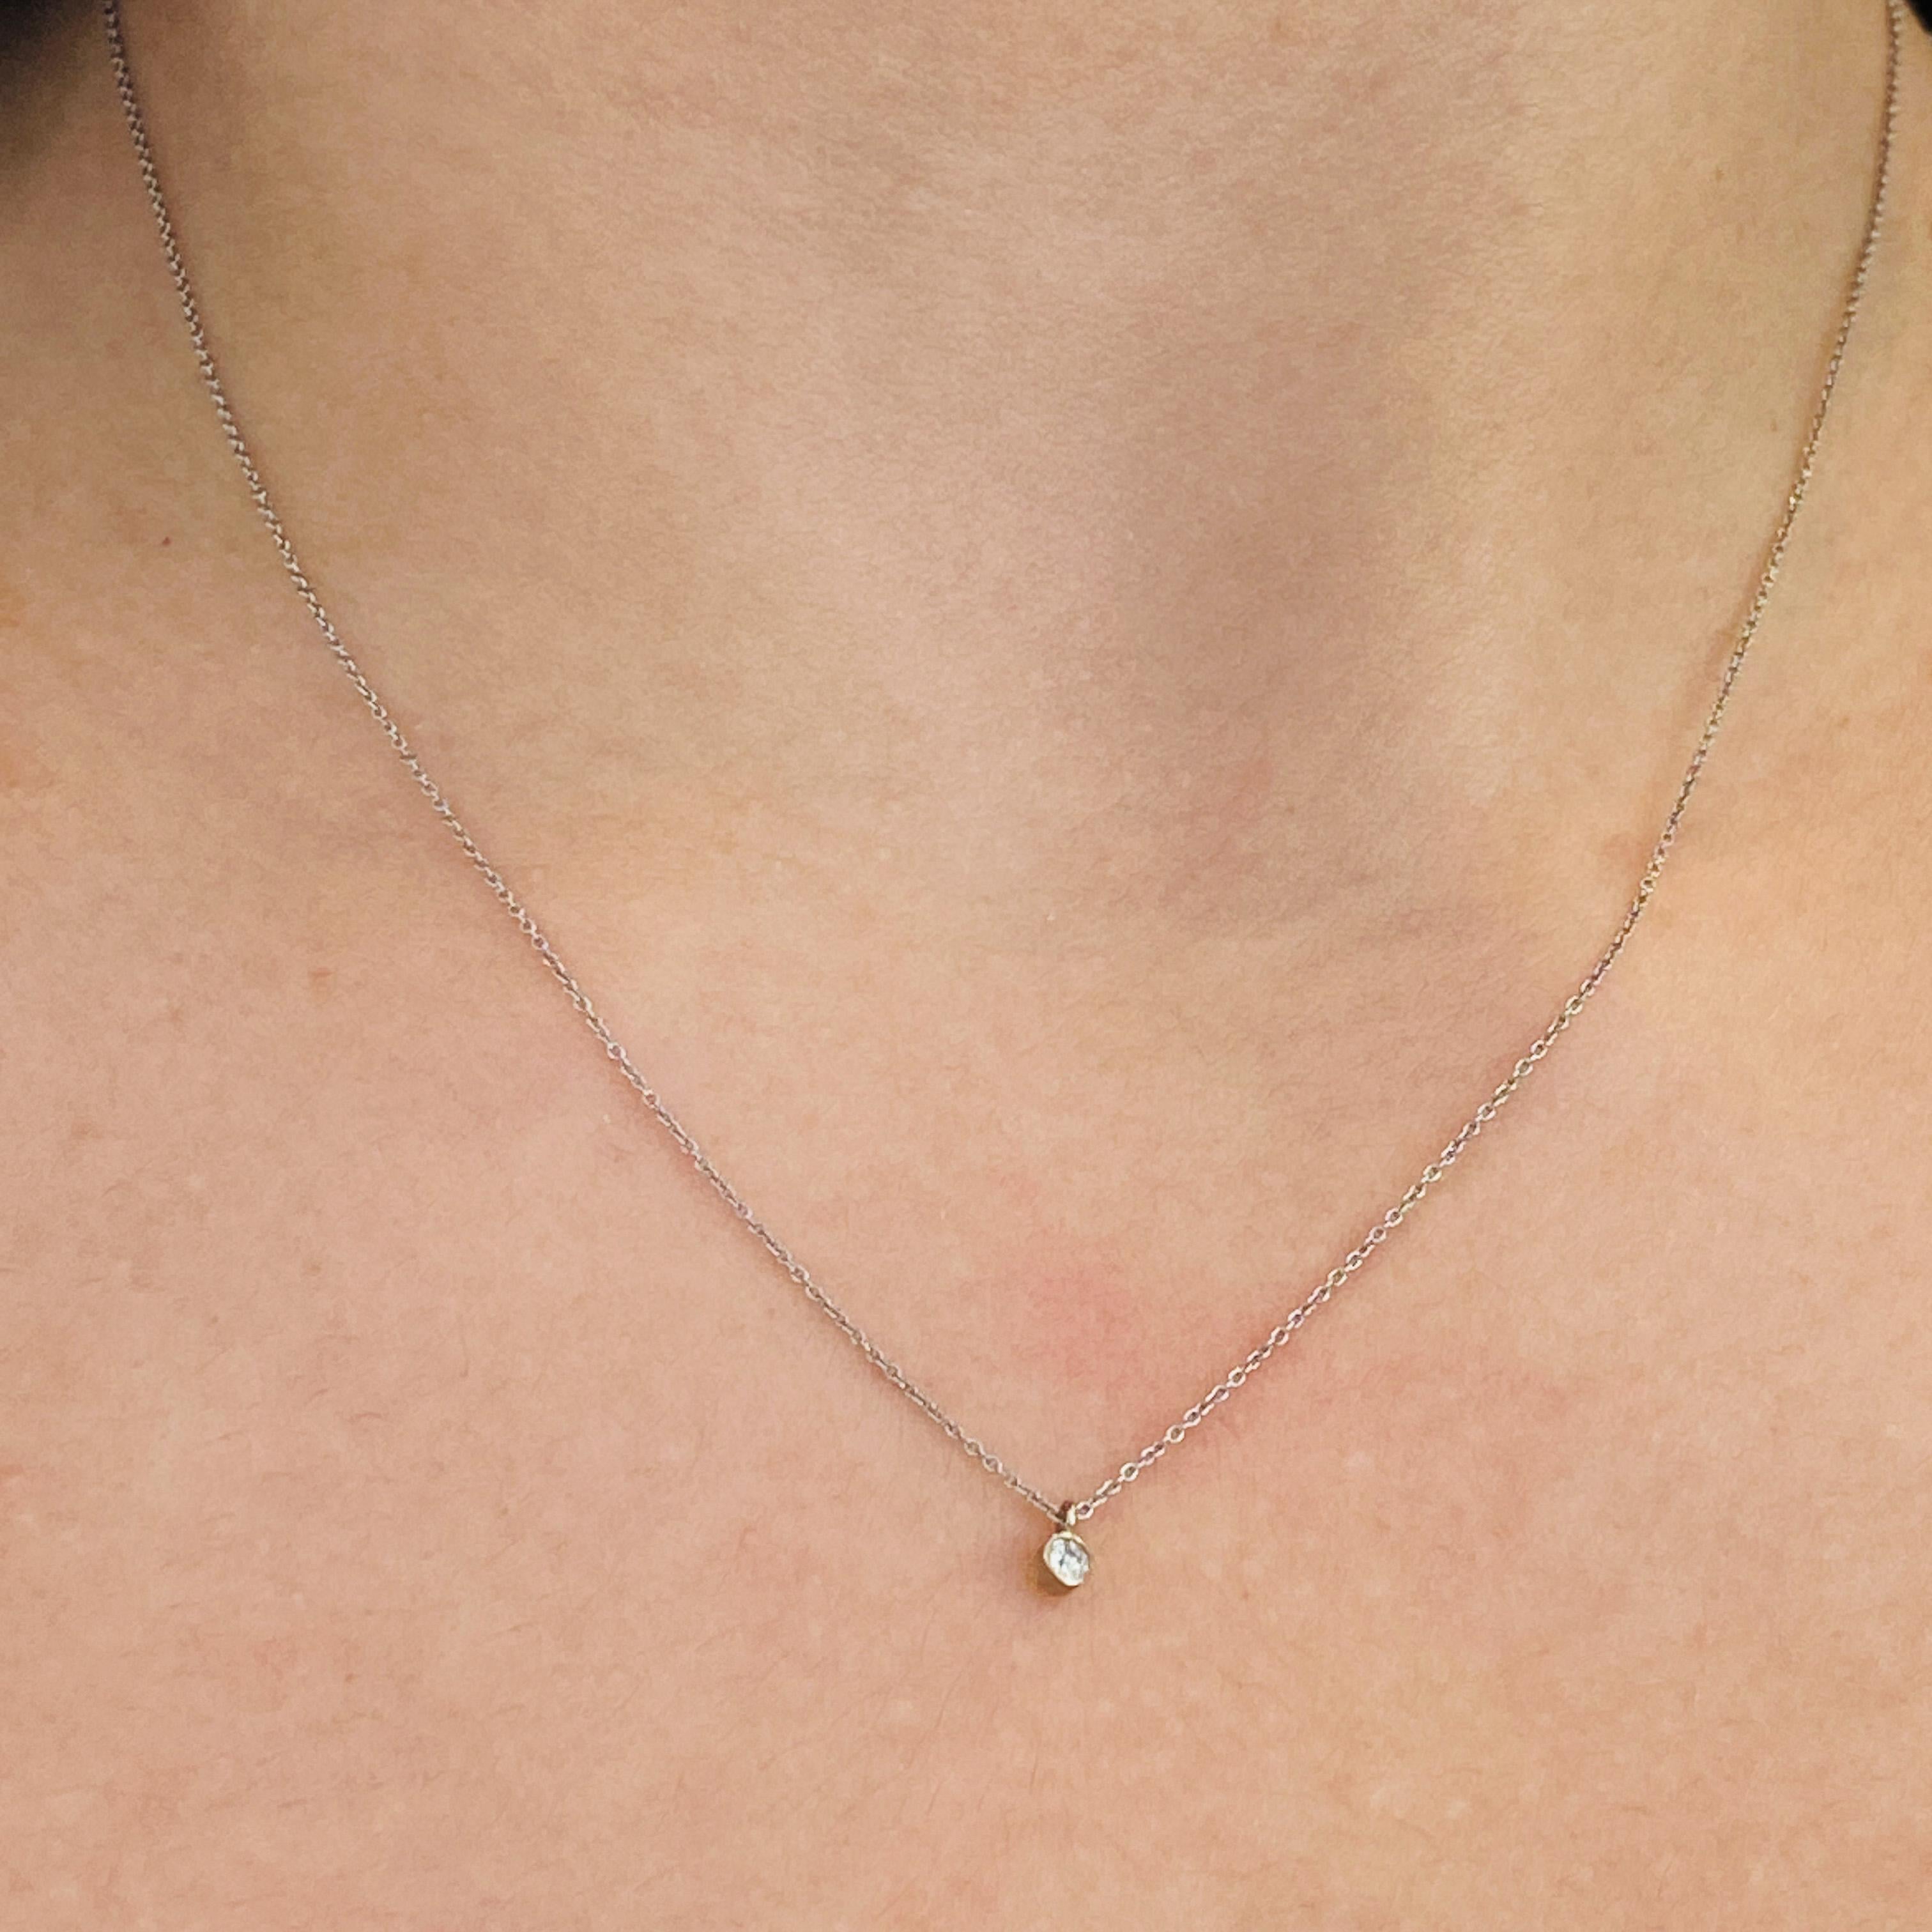 This adorable diamond solitaire necklace is a perfect everyday accent around the neck! At 16 inches long, it's easy to stack this necklace with other favorite chains and pendants. The clean and bright white gold and bright diamond are perfect for a